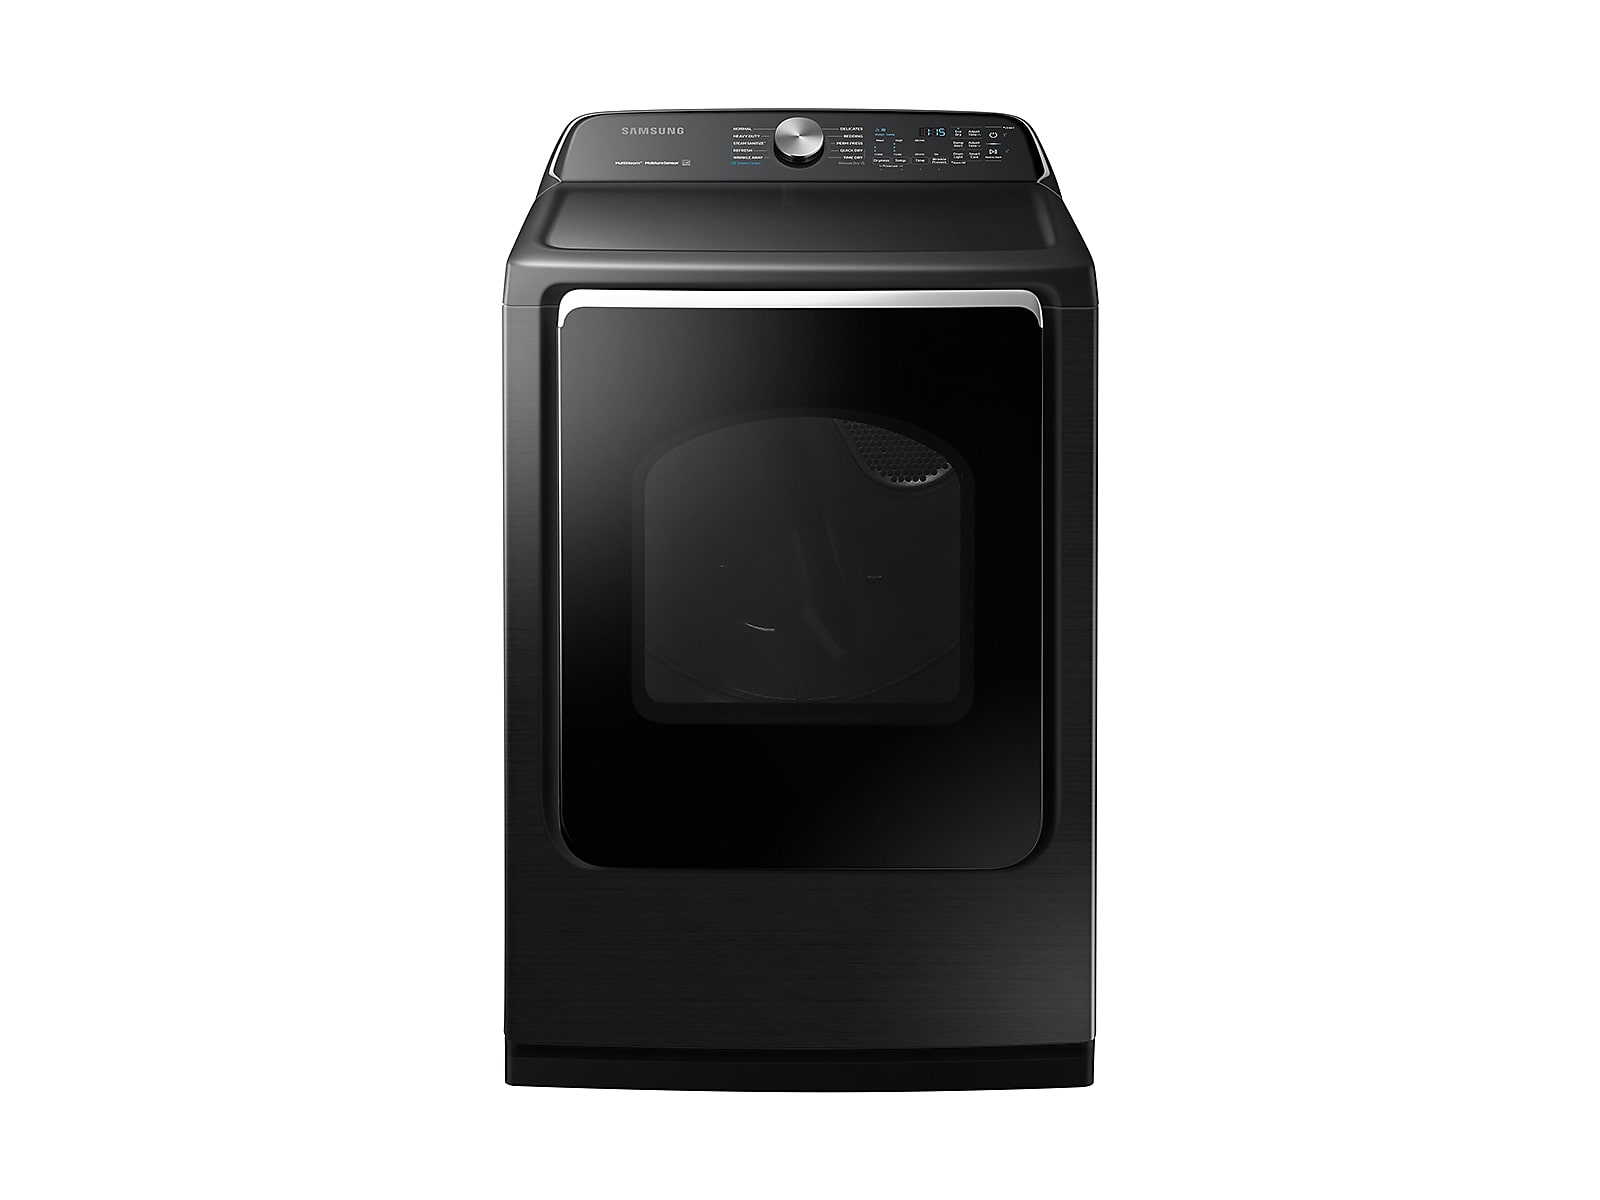 Samsung 7.4 cu. ft. Electric Dryer with Steam Sanitize+ in Black Stainless Steel(DVE54R7200V/A3)